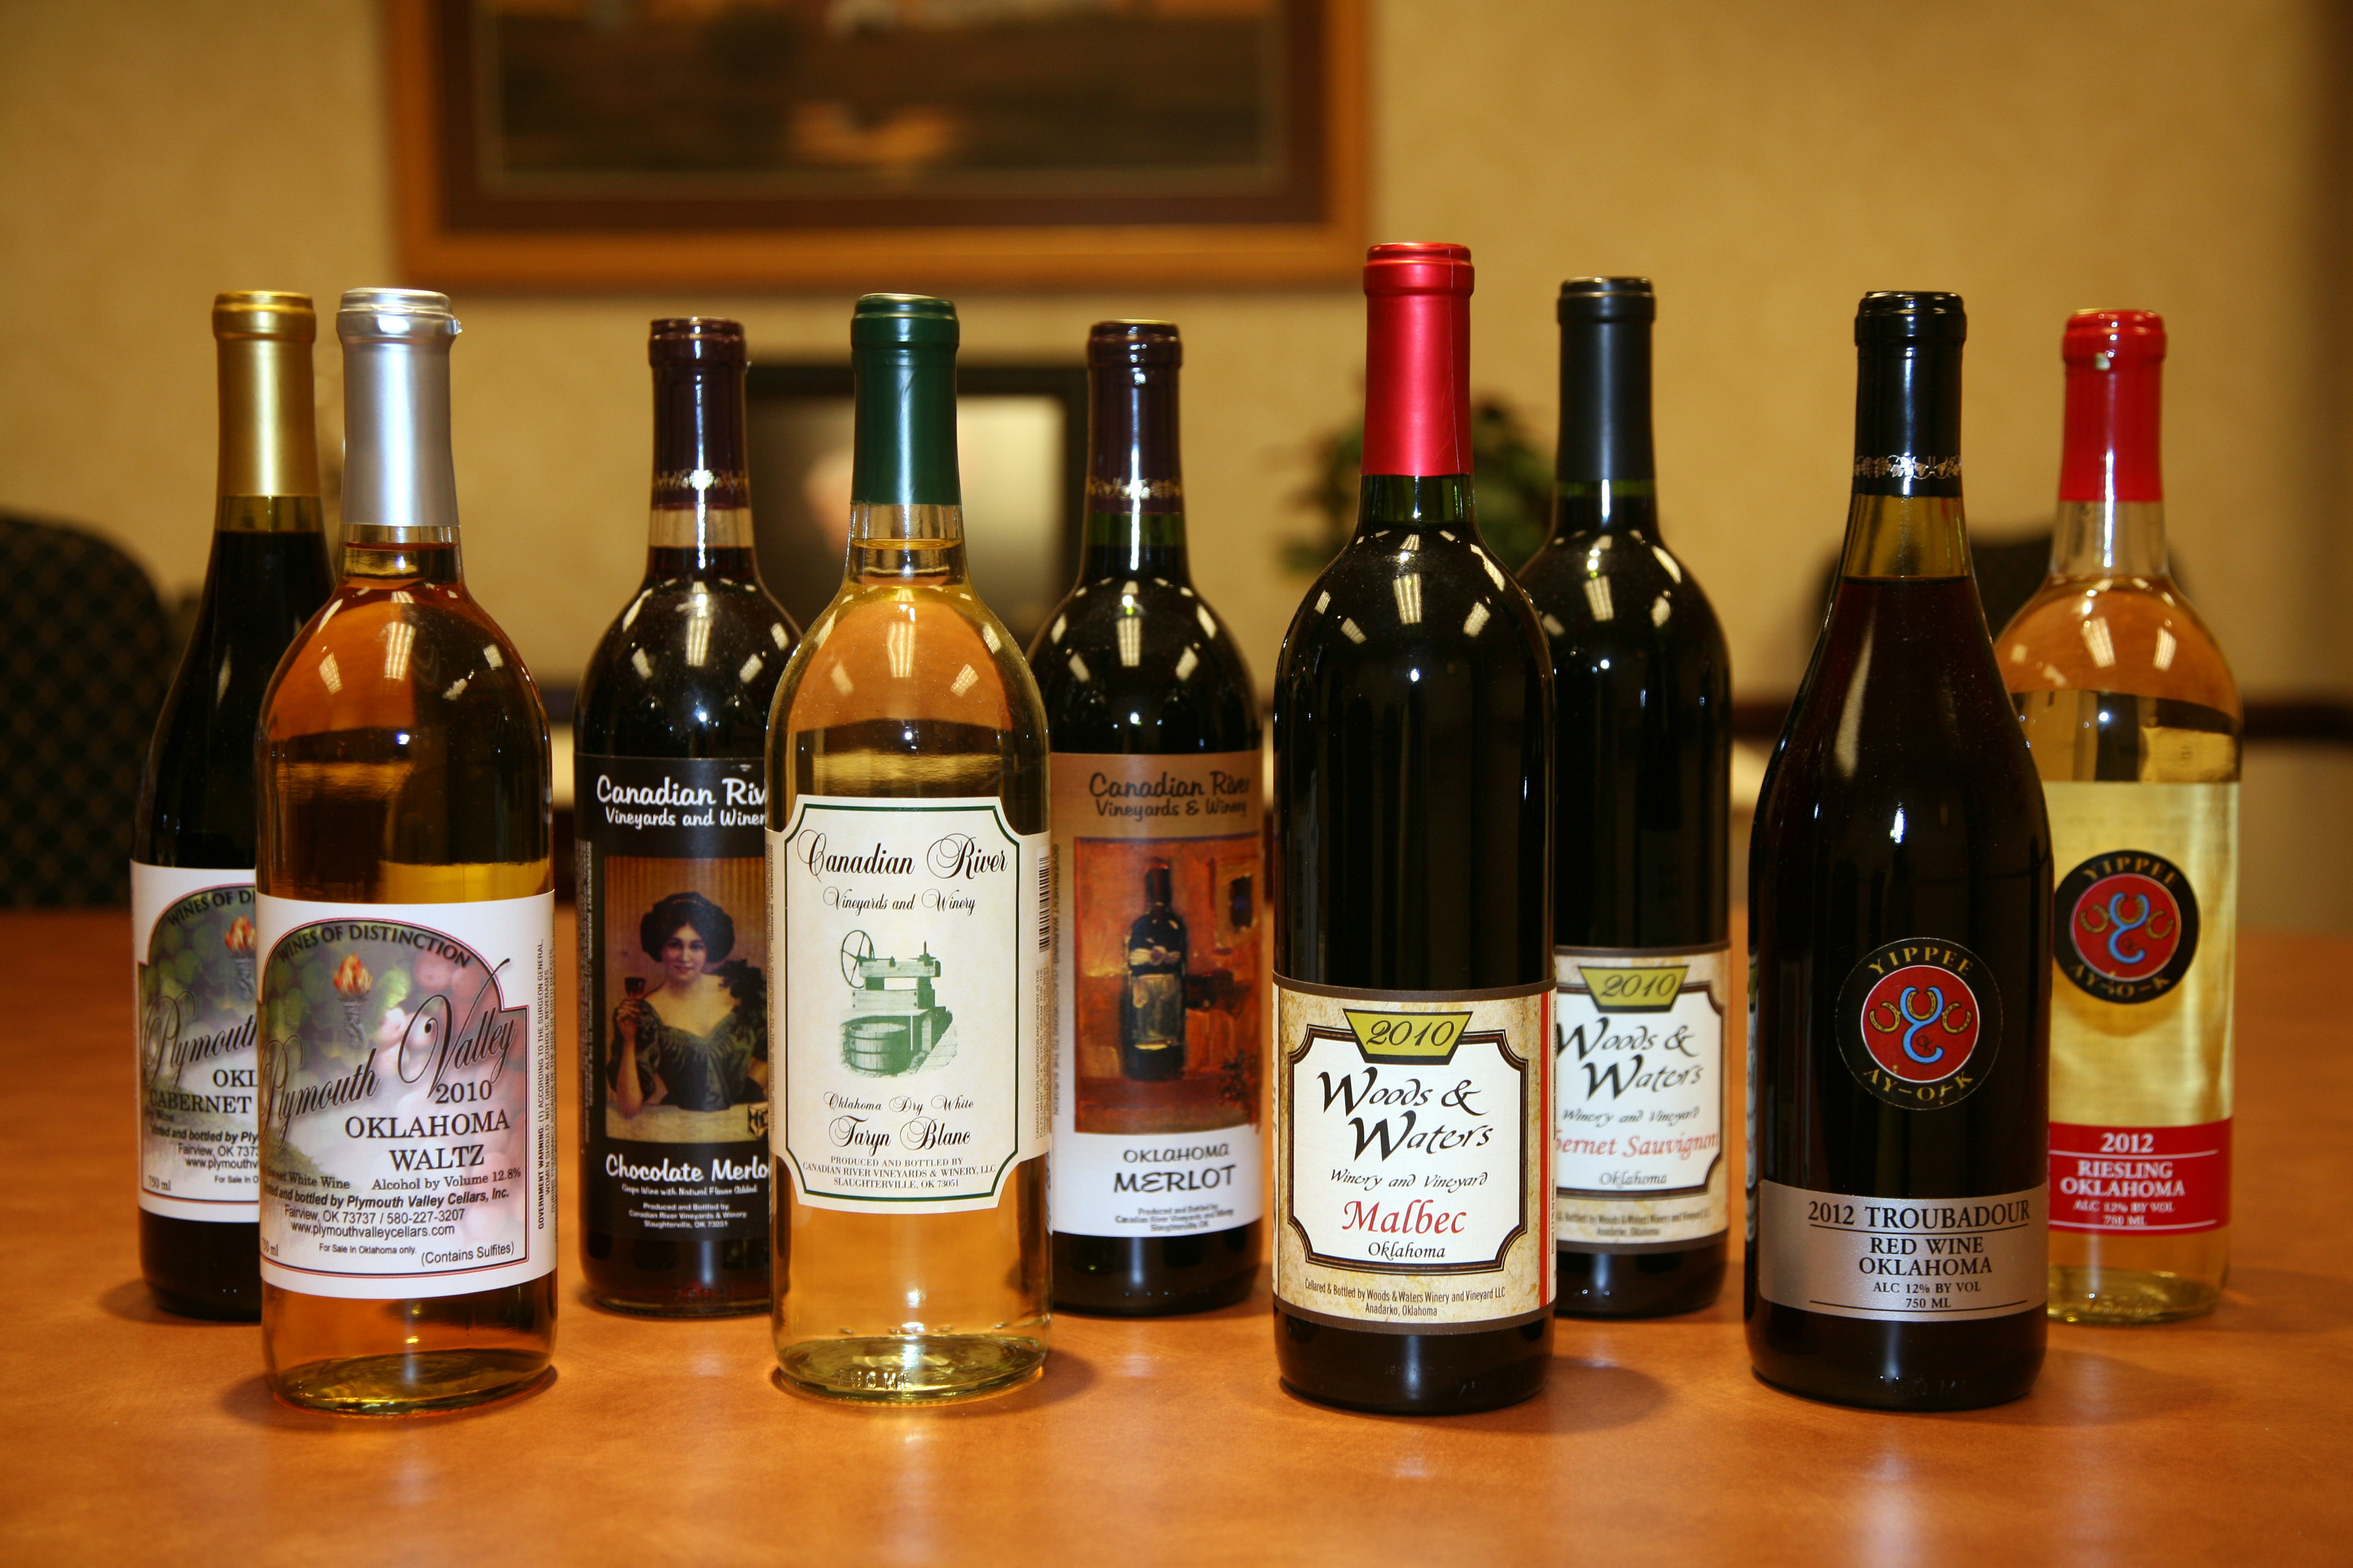 Project reveals opportunities for Oklahoma wine industry